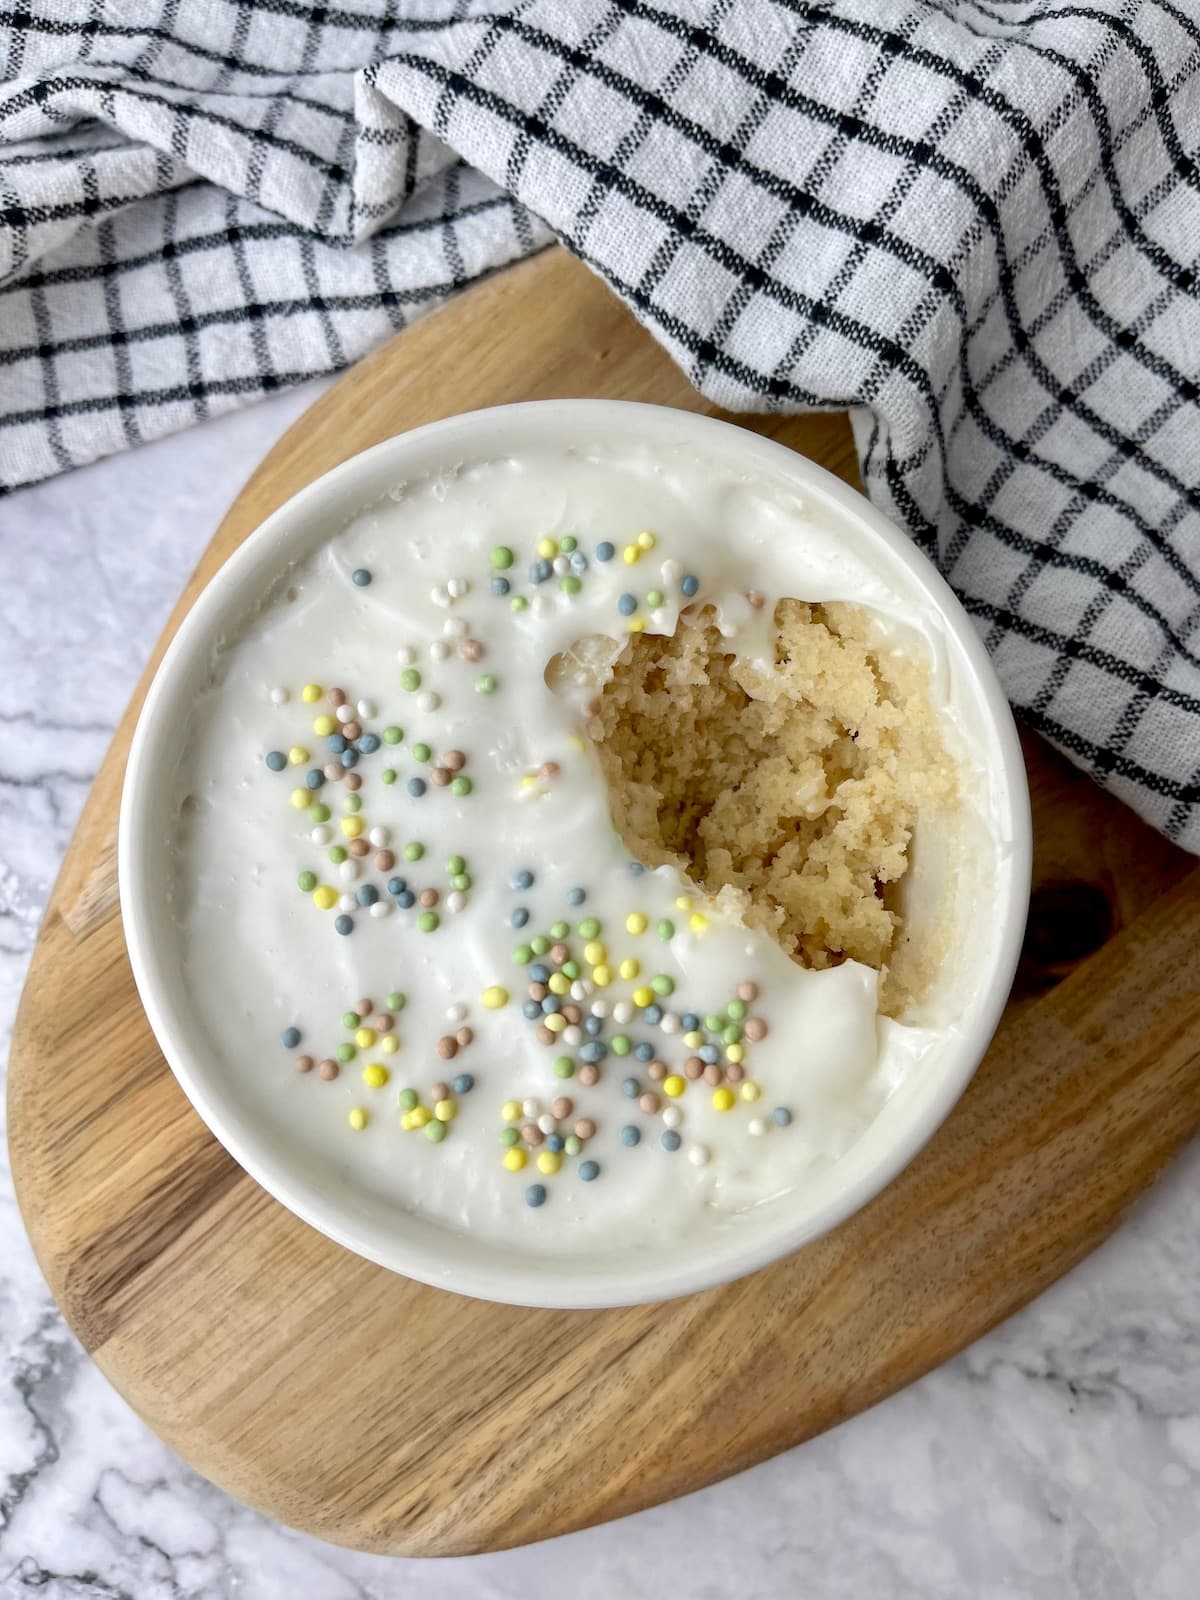 A vegan vanilla mug cake topped with frosting and sprinkles, with a bite taken out of it.